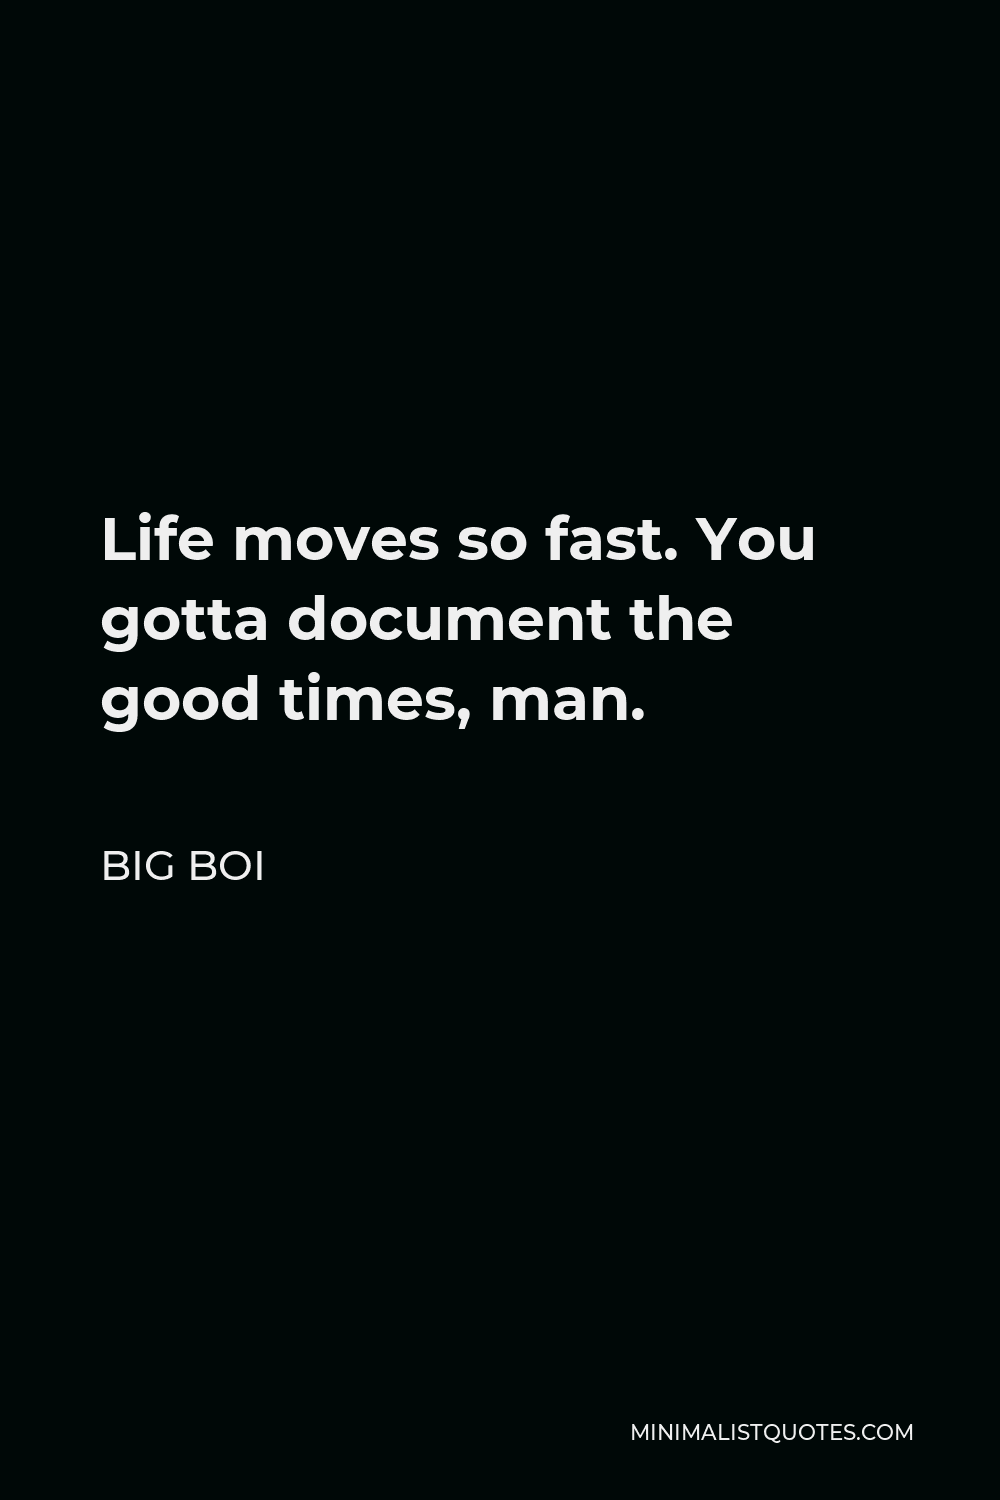 Big Boi Quote - Life moves so fast. You gotta document the good times, man.